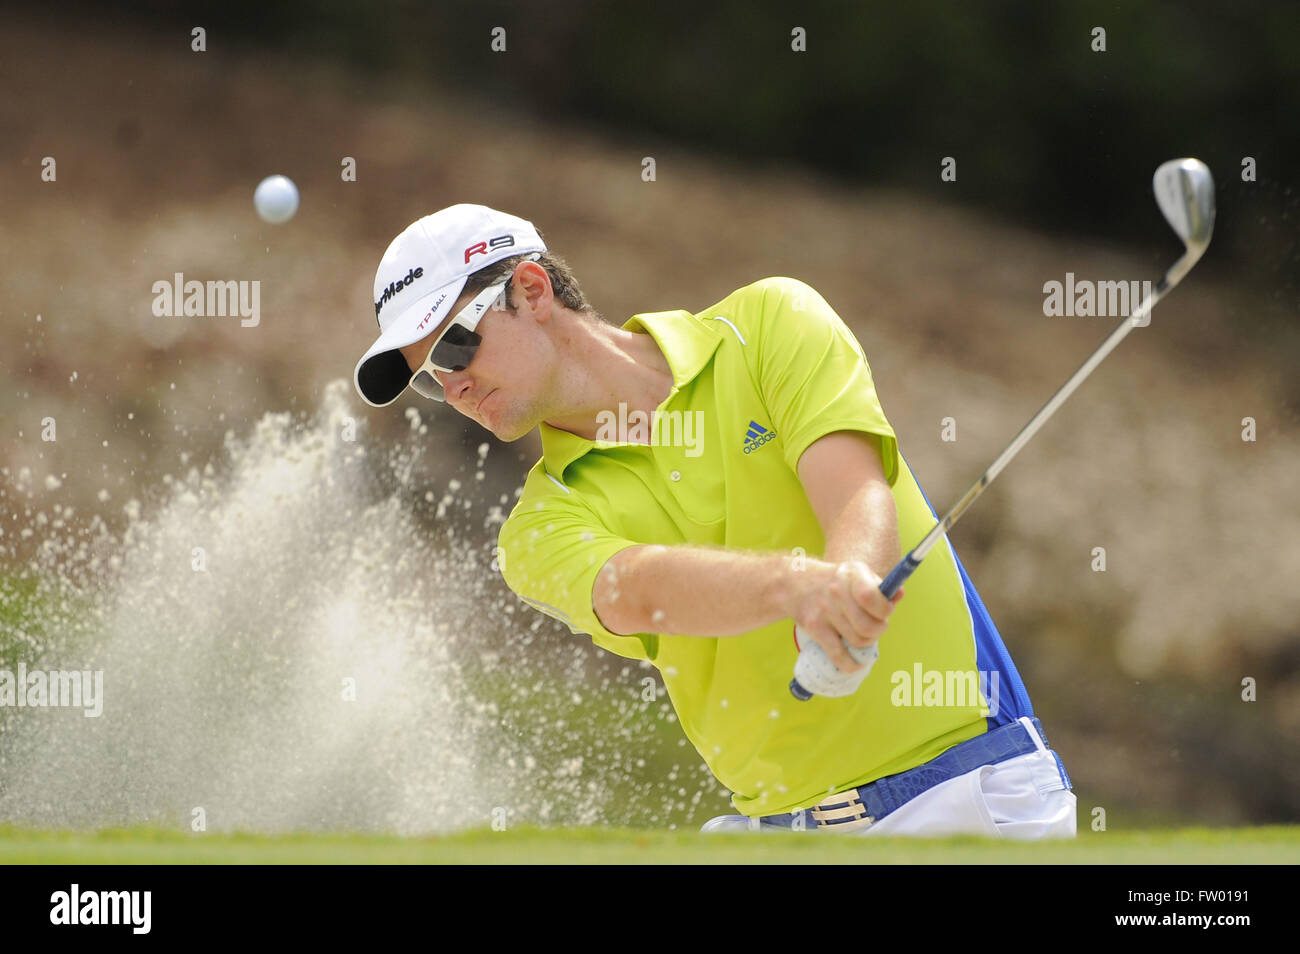 Ponte Vedra Beach, Florida, UNITED STATES. 6th May, 2009. Justin Rose hits from a green-side bunker on the 14th hole during a practice round at TPC Sawgrass on May 6, 2009 in Ponte Vedra Beach, Florida. ZUMA Press/Scott A. Miller © Scott A. Miller/ZUMA Wire/Alamy Live News Stock Photo